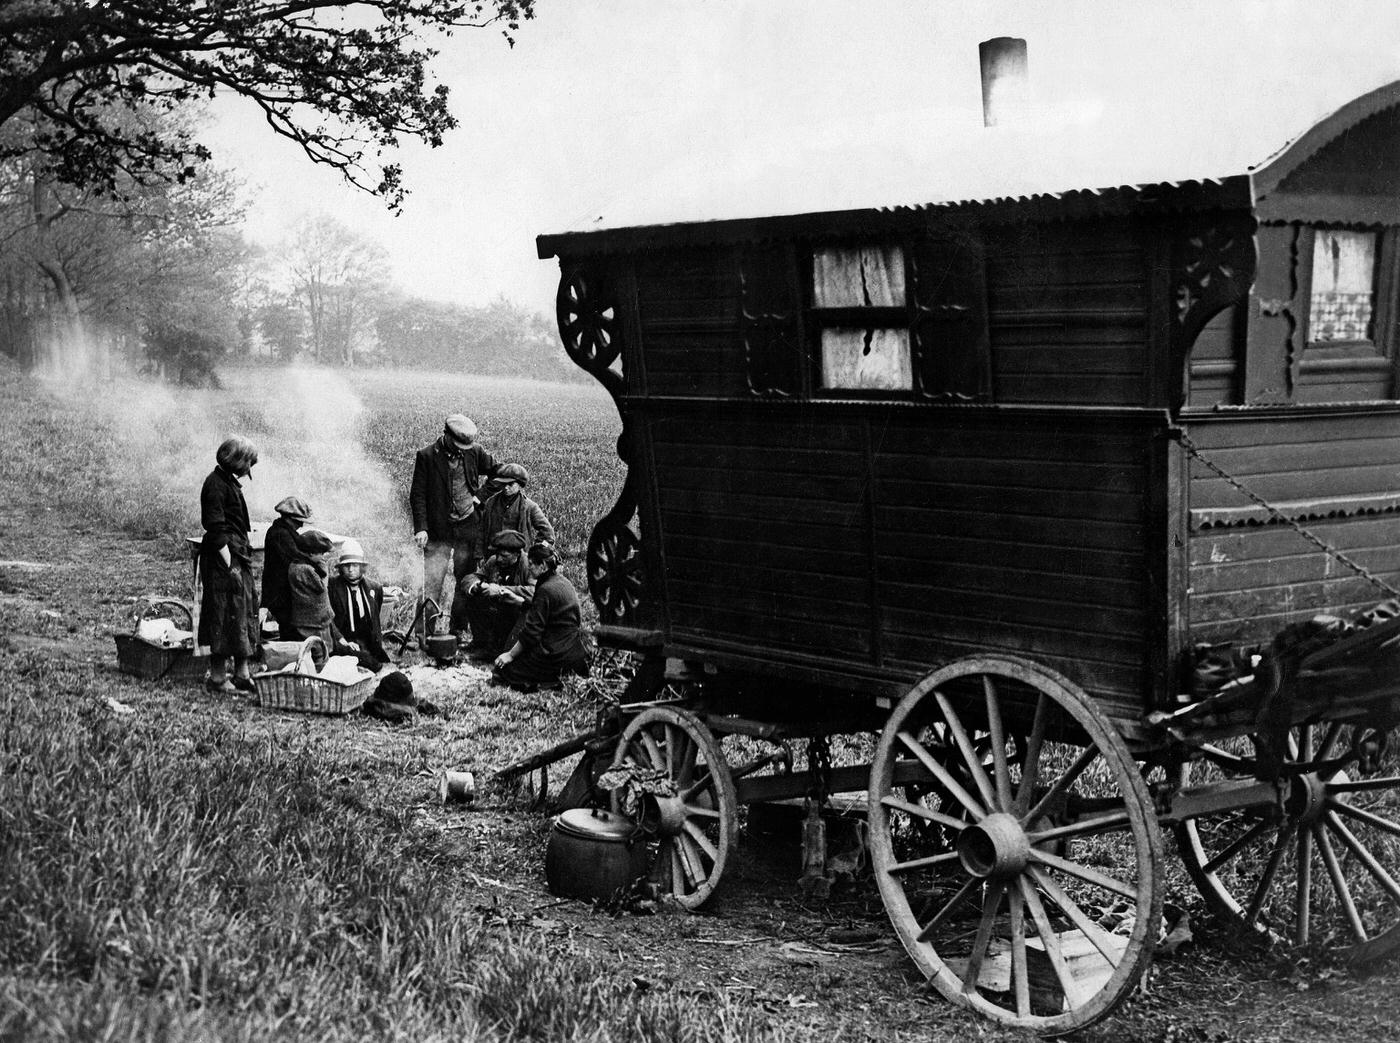 Gypsies cooking in the open, photographed by Eduard Schlochauer, published in 'Sieben Tage' in 1931.